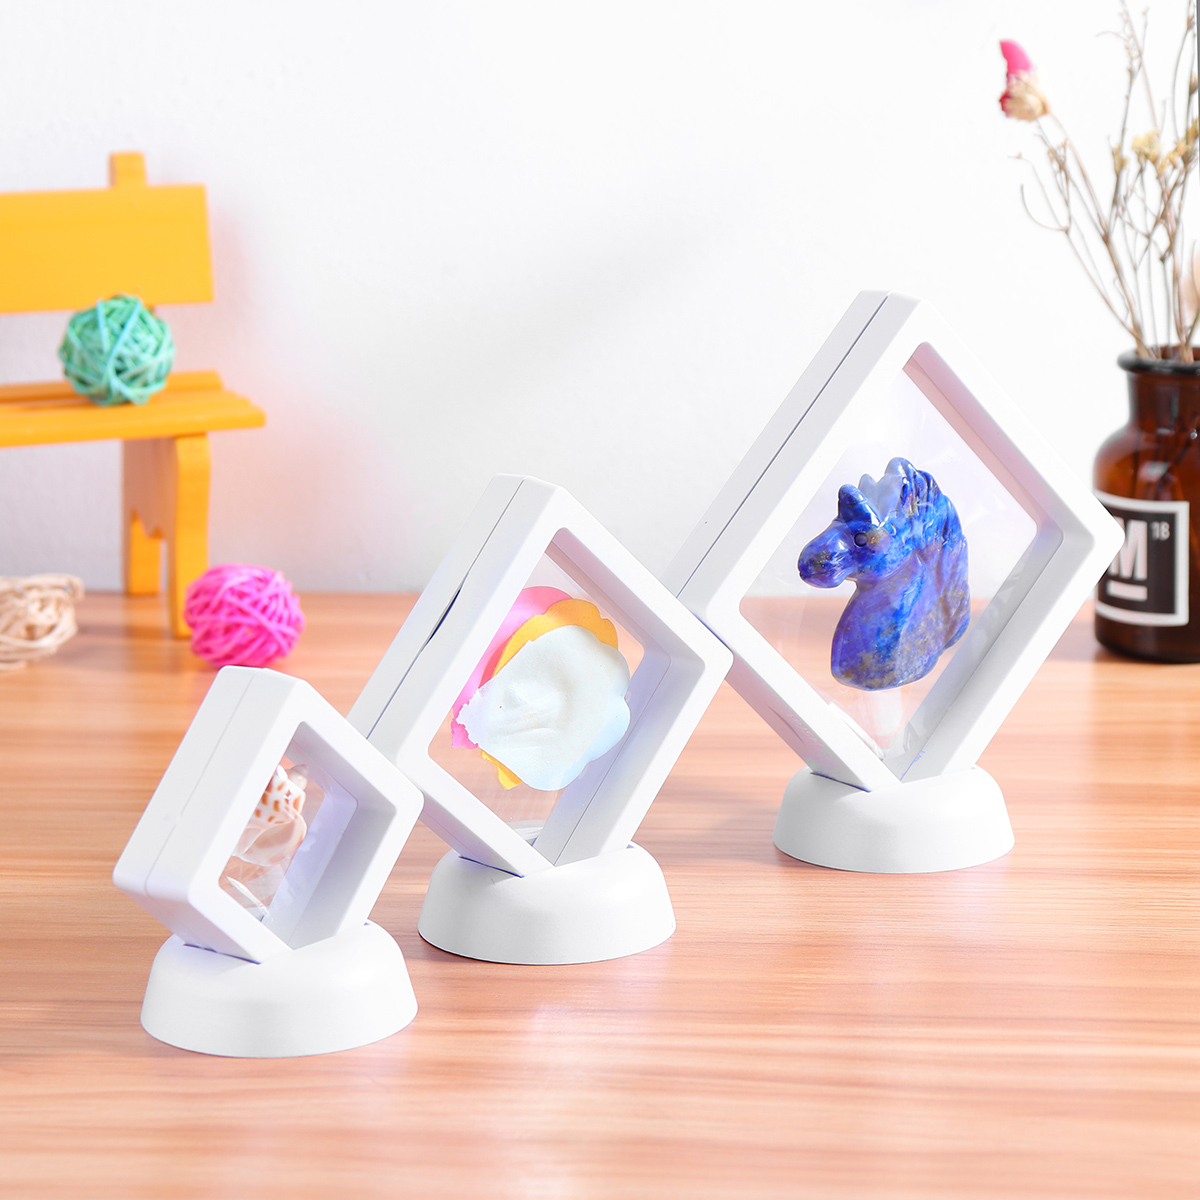 Square-3D-Album-Floating-Frame-Holder-Coin-Box-Jewelry-Box-Display-Showcase-with-Stand-1442341-3